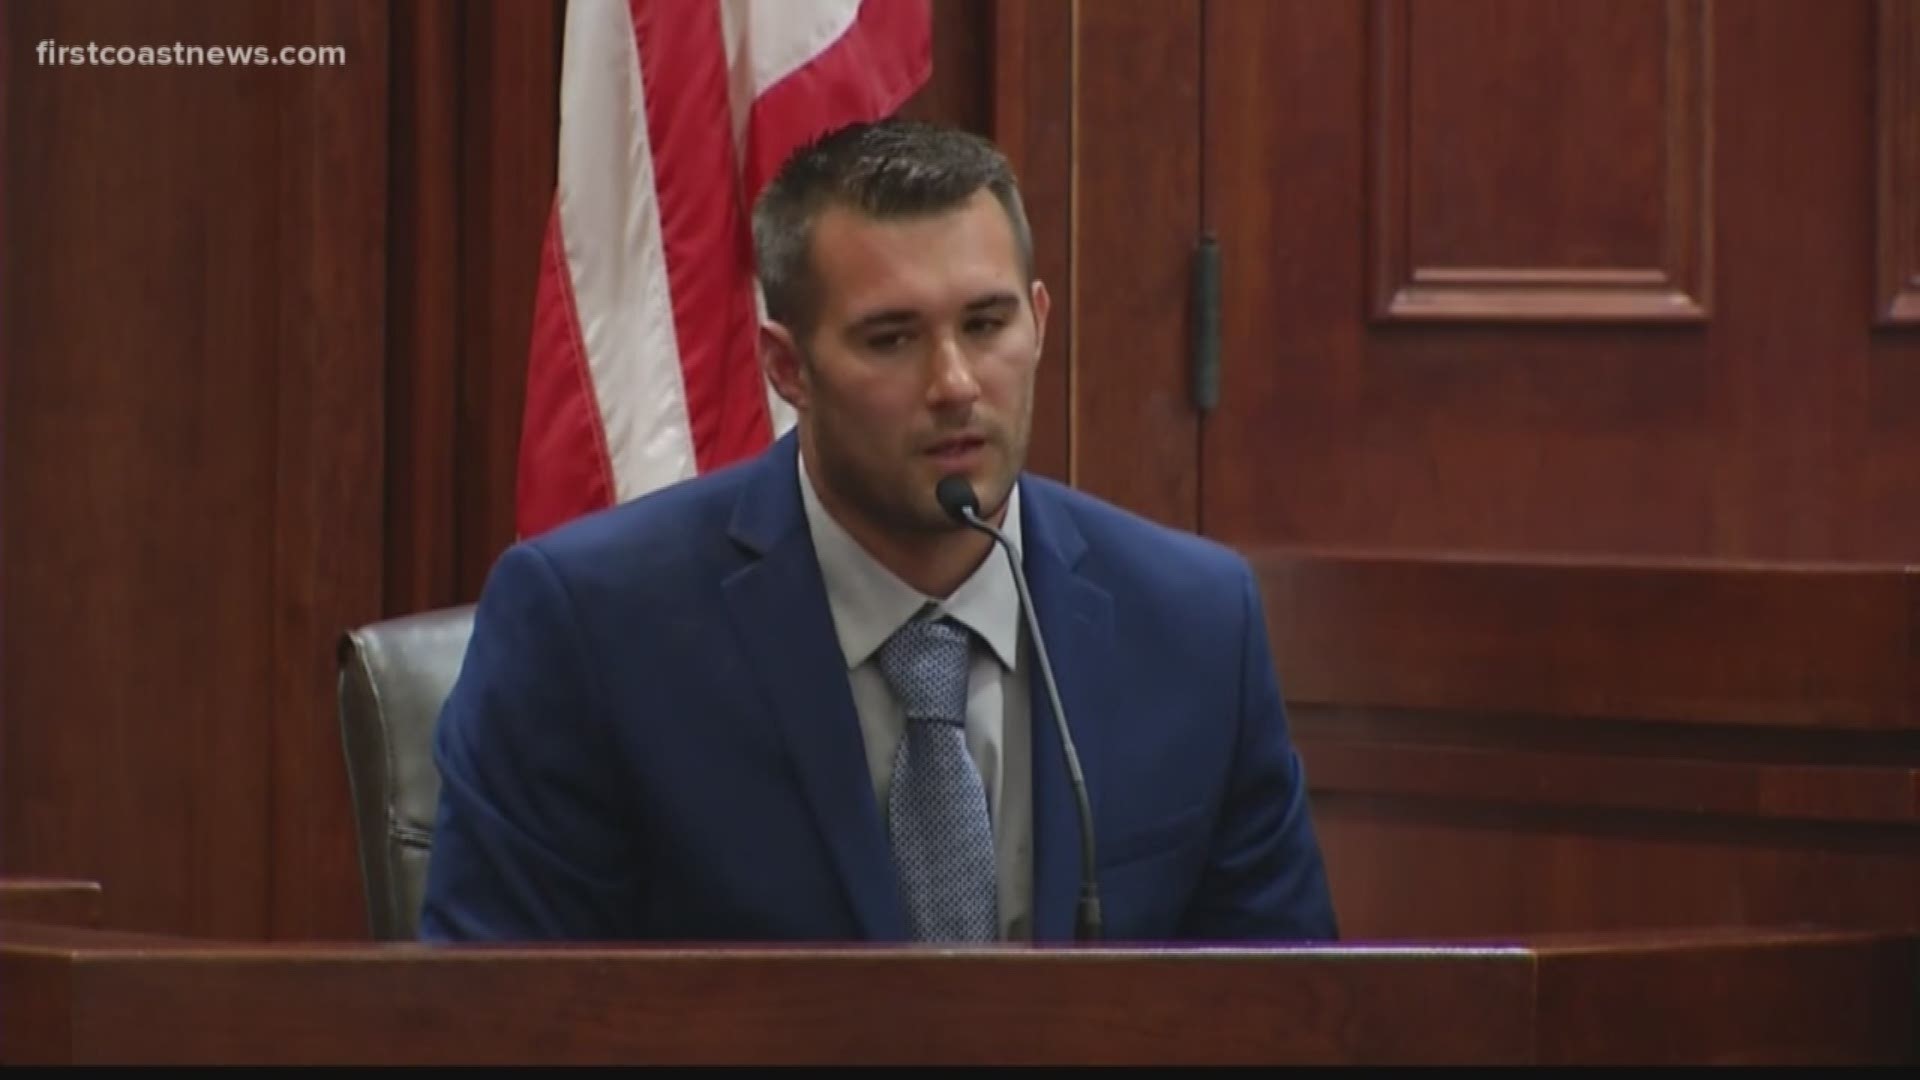 Former Kingsland police officer Zachariah Presley could face 20 years in prison for the shooting death of 33-year-old Anthony Green.